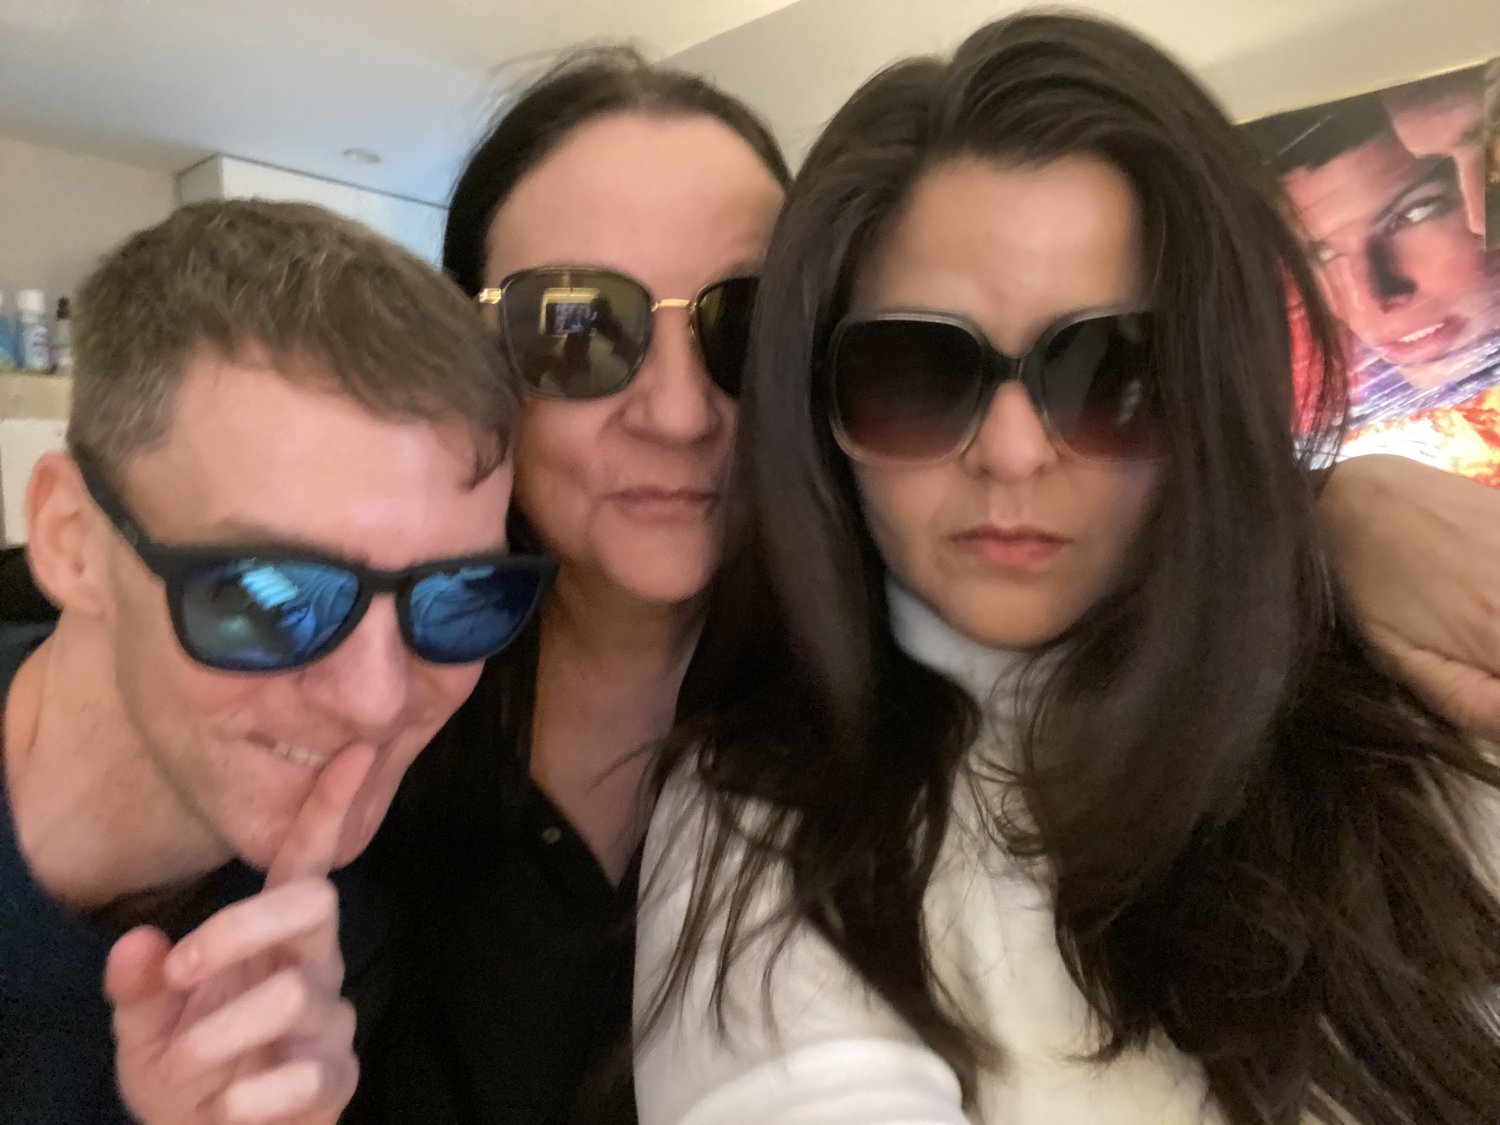 GOOD FOR HER: EPISODE 26: Kelly Cutrone Is On This Episode